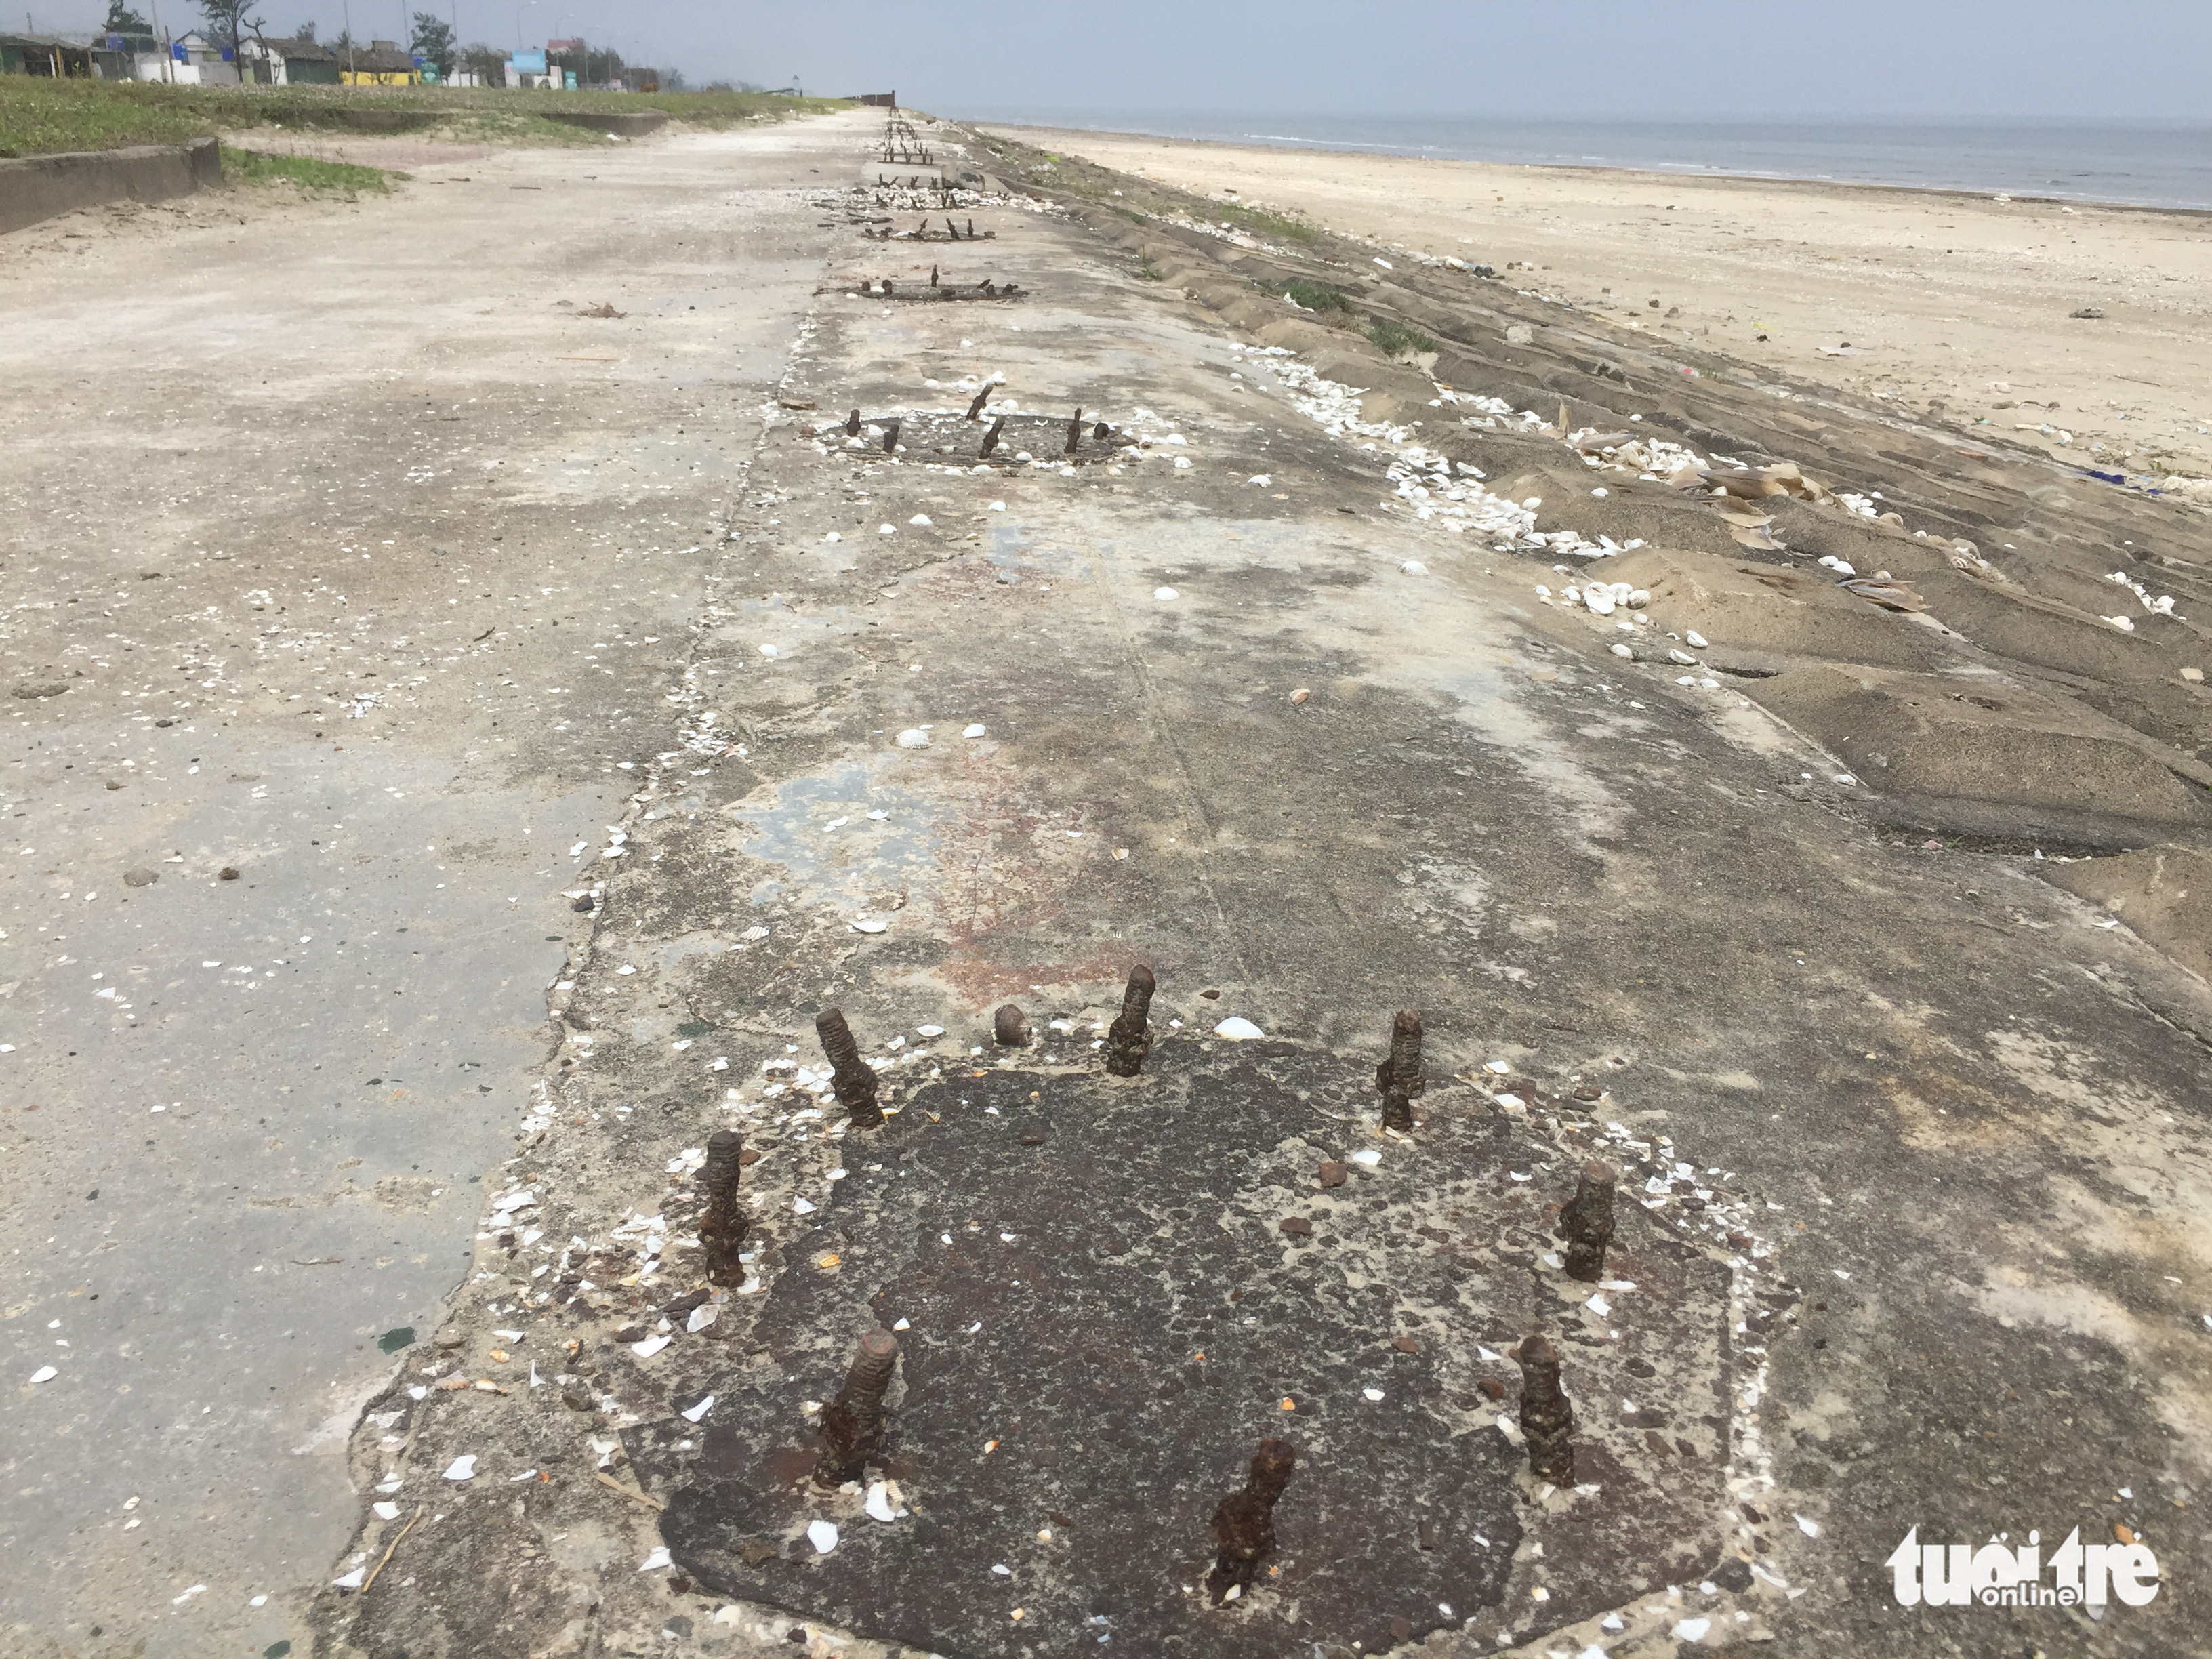 Decorative iron columns have been removed from Xuan Hai Beach in Ha Tinh Province, March 19, 2022. Photo: Le Minh / Tuoi Tre